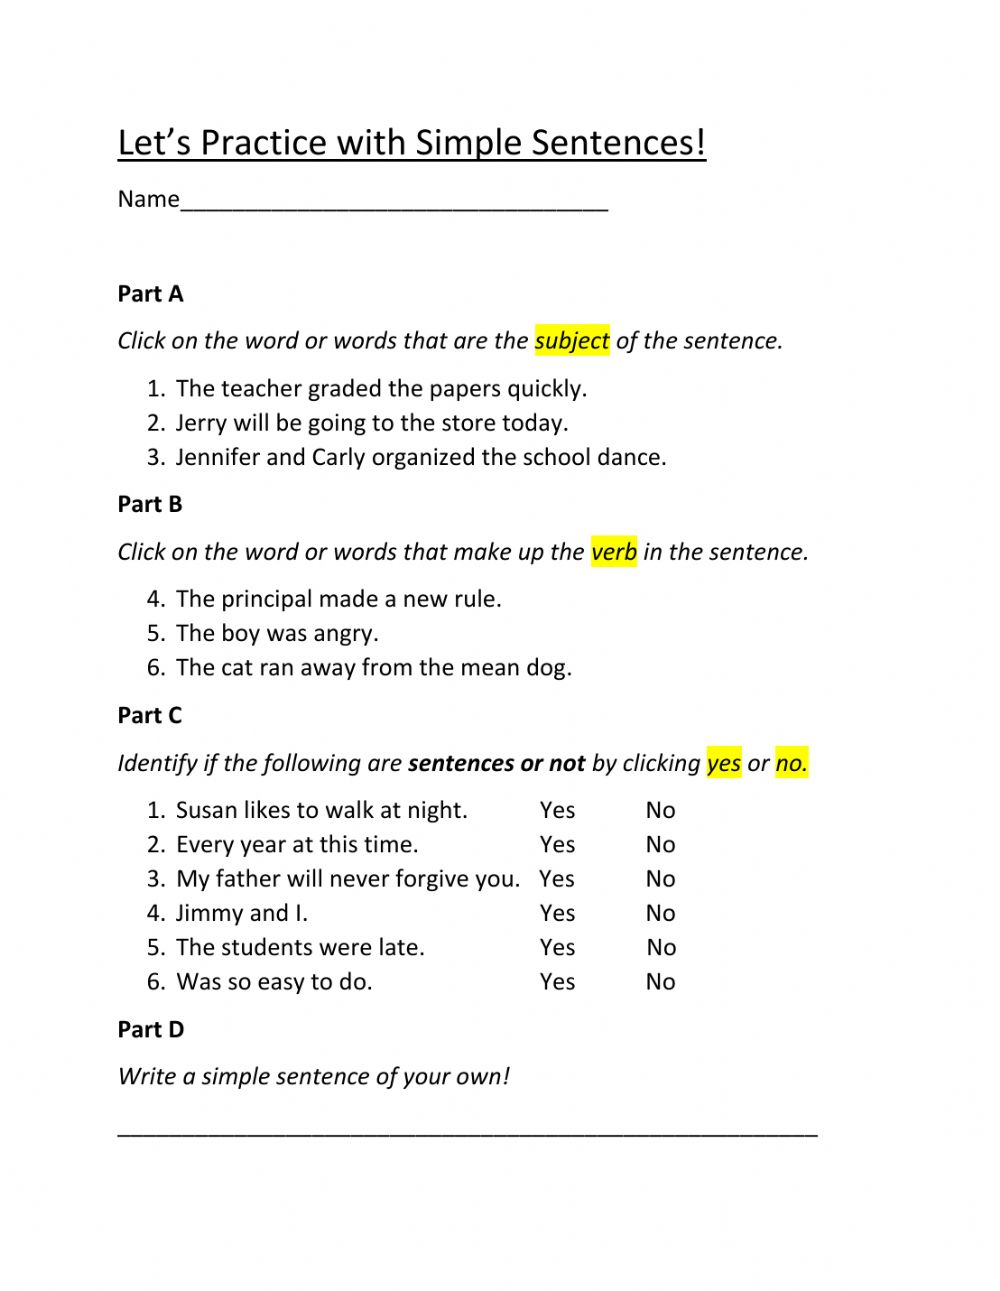 Identifying Subjects And Verbs Worksheet